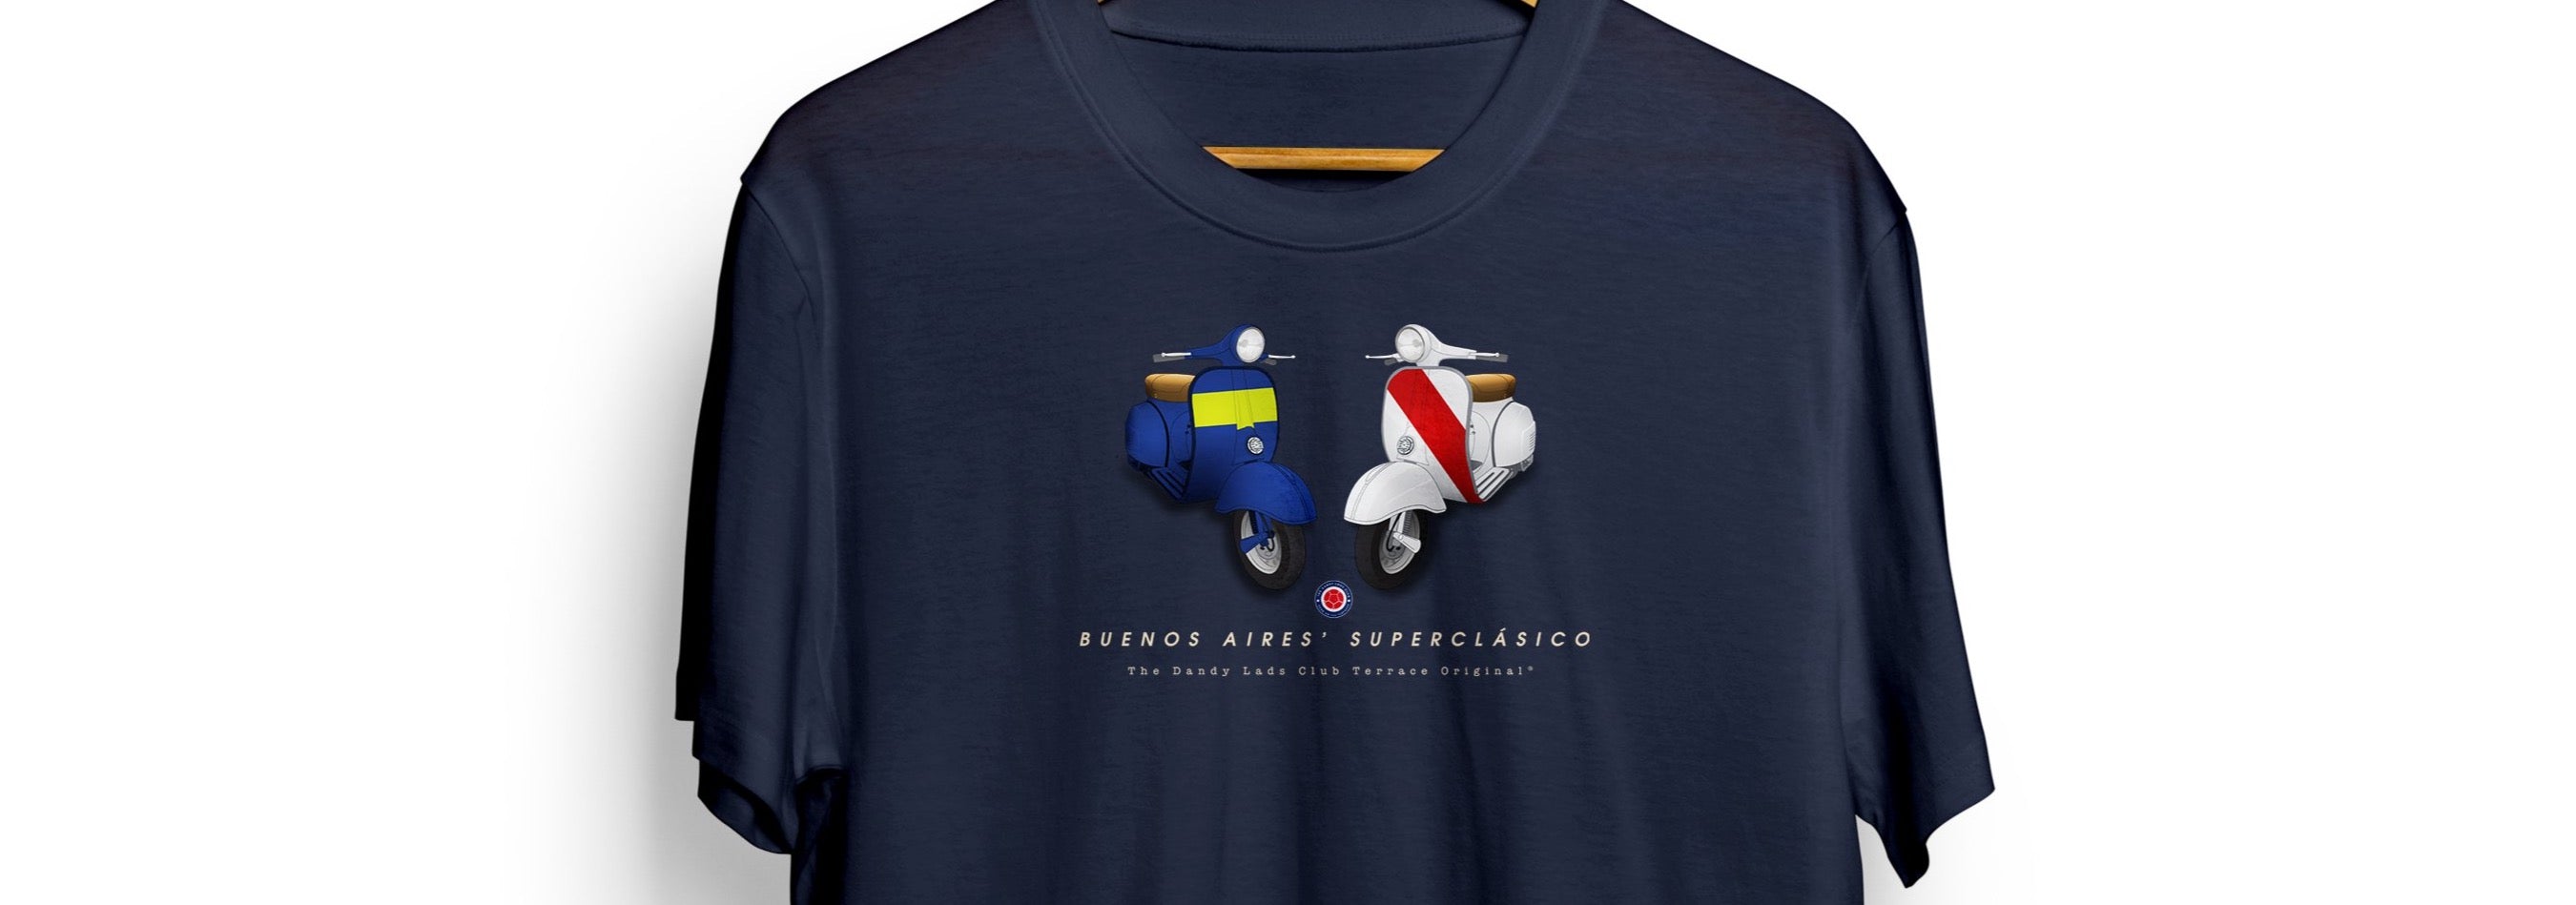 Scooters Of The Superclasico  Football Casuals Awaydays T Shirt